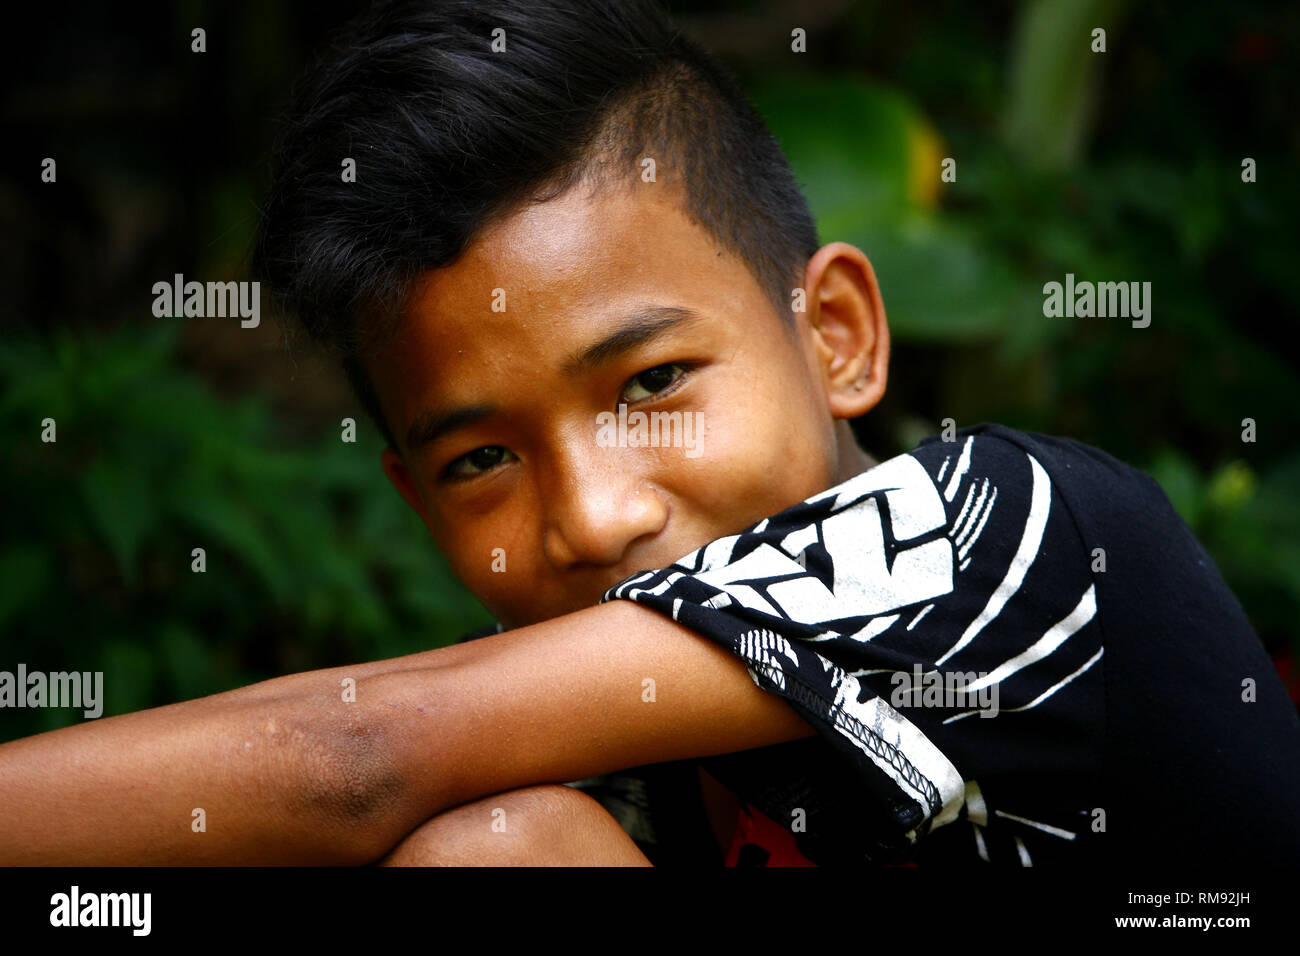 ANTIPOLO CITY, PHILIPPINES - JANUARY 25, 2019: Young Asian boy pose and ...